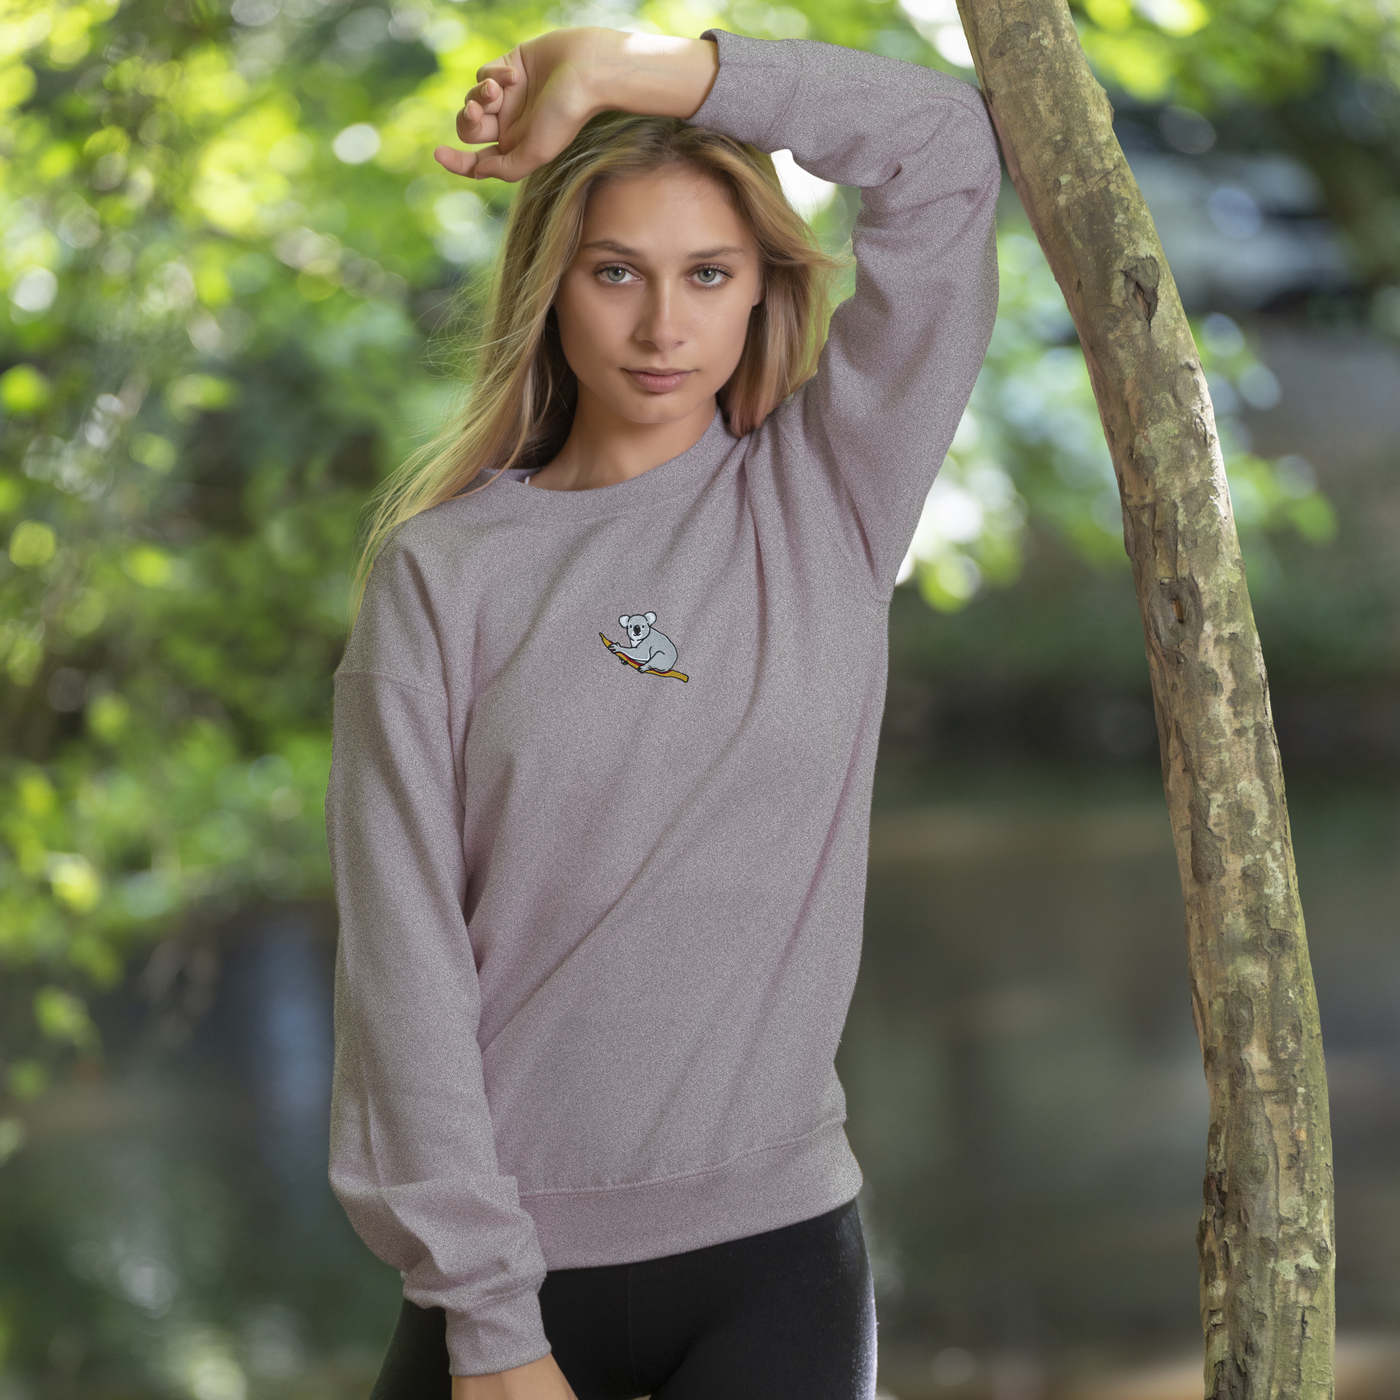 Bobby's Planet Women's Embroidered Koala Sweatshirt from Australia Down Under Animals Collection in Sport Grey Color#color_sport-grey